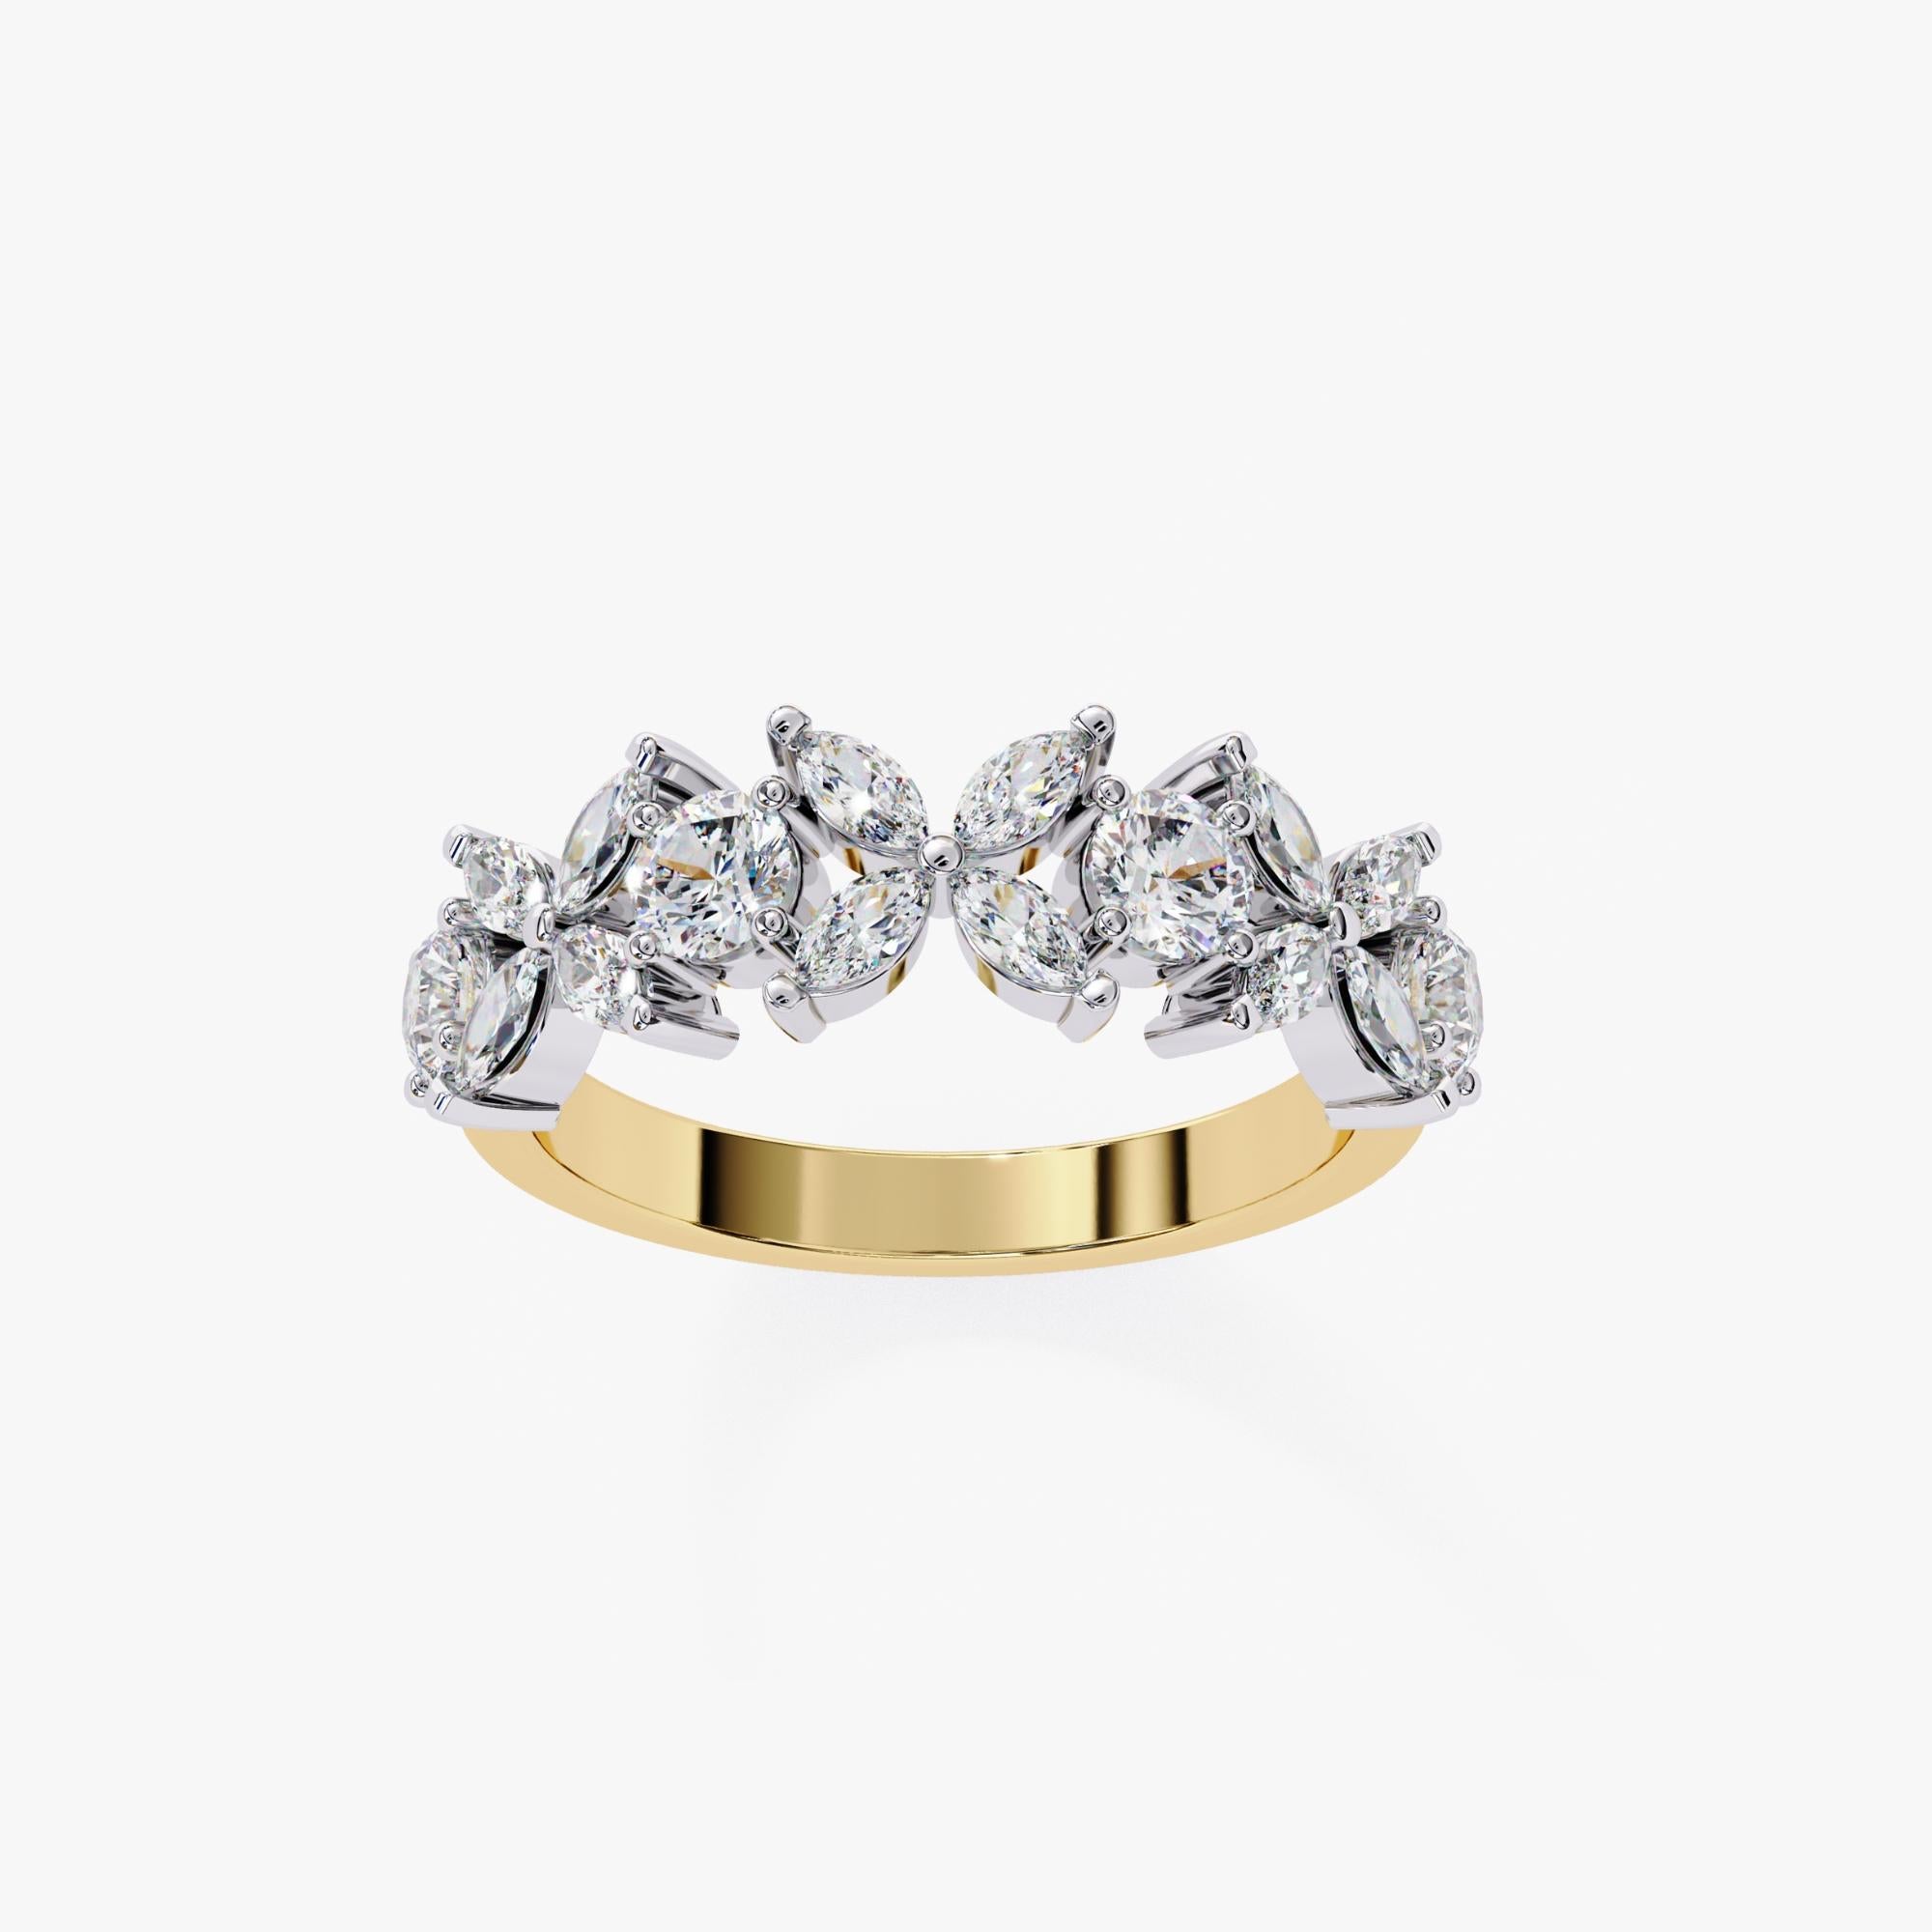 1.06 Ctw, Marquise and Round Diamond Ring, Diamond Band, 14K Solid Gold Neuf - En vente à New York, NY